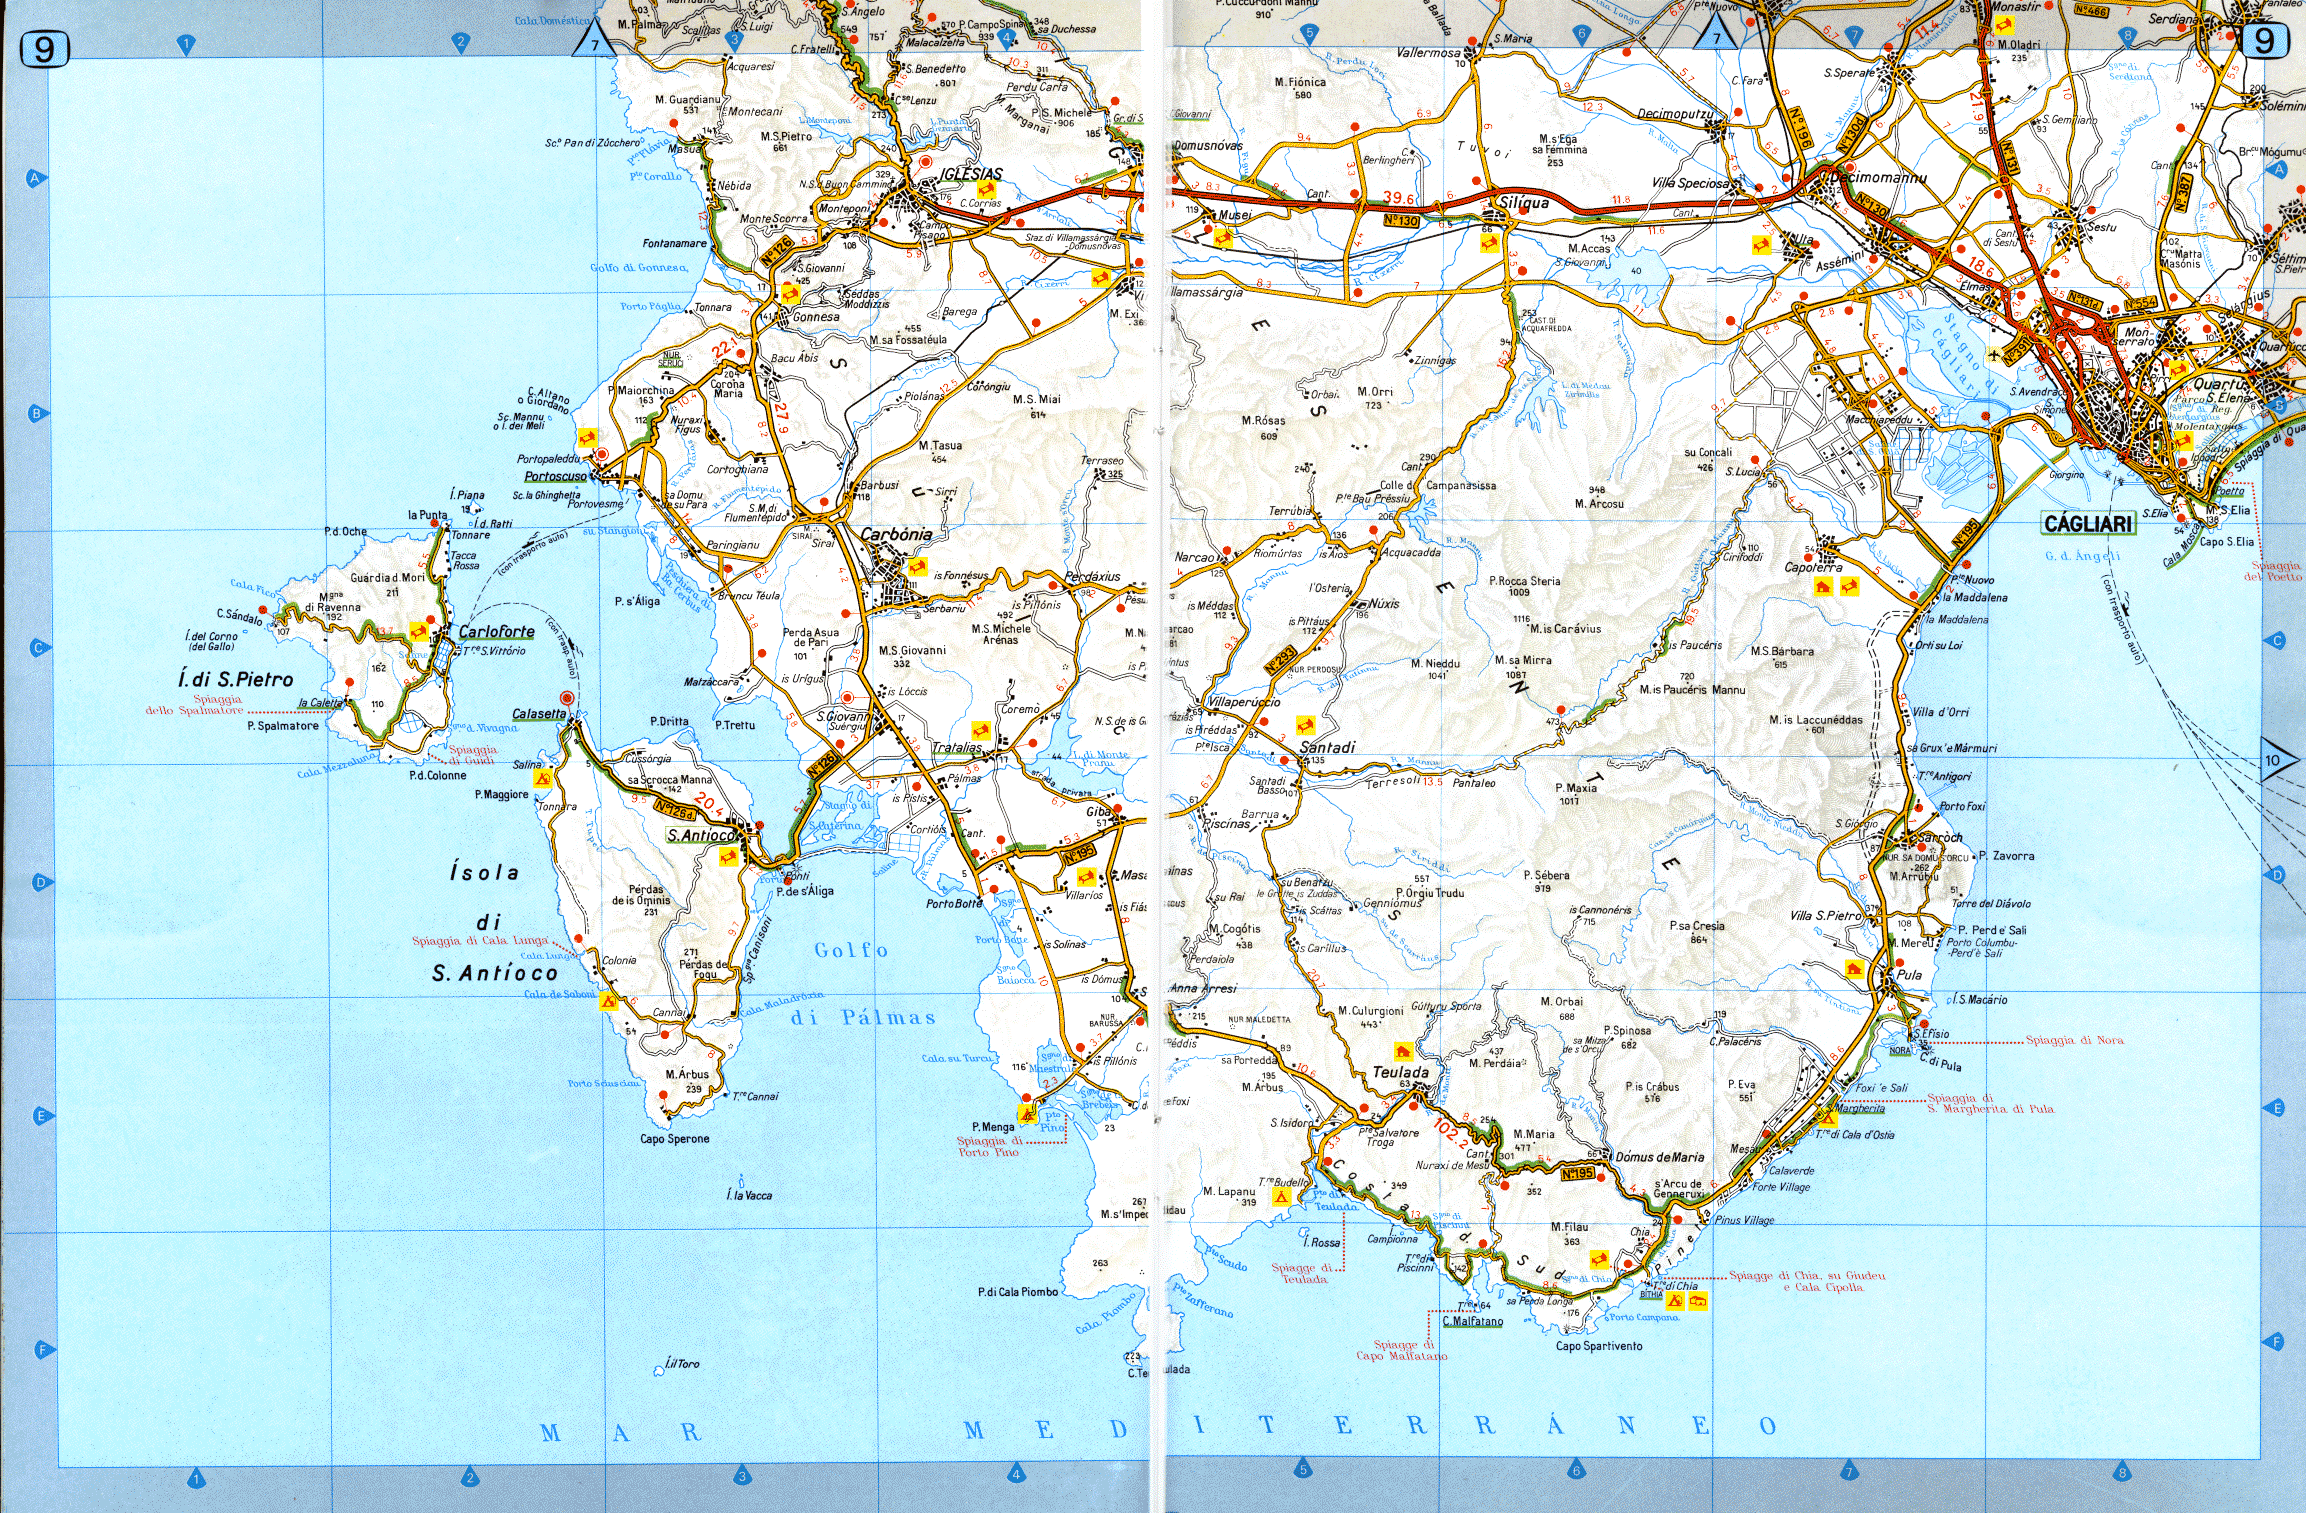 Road map to Costa del Sud - Costa del Sud is located west of Cagliari on the south coast of Sardinia, Italy 